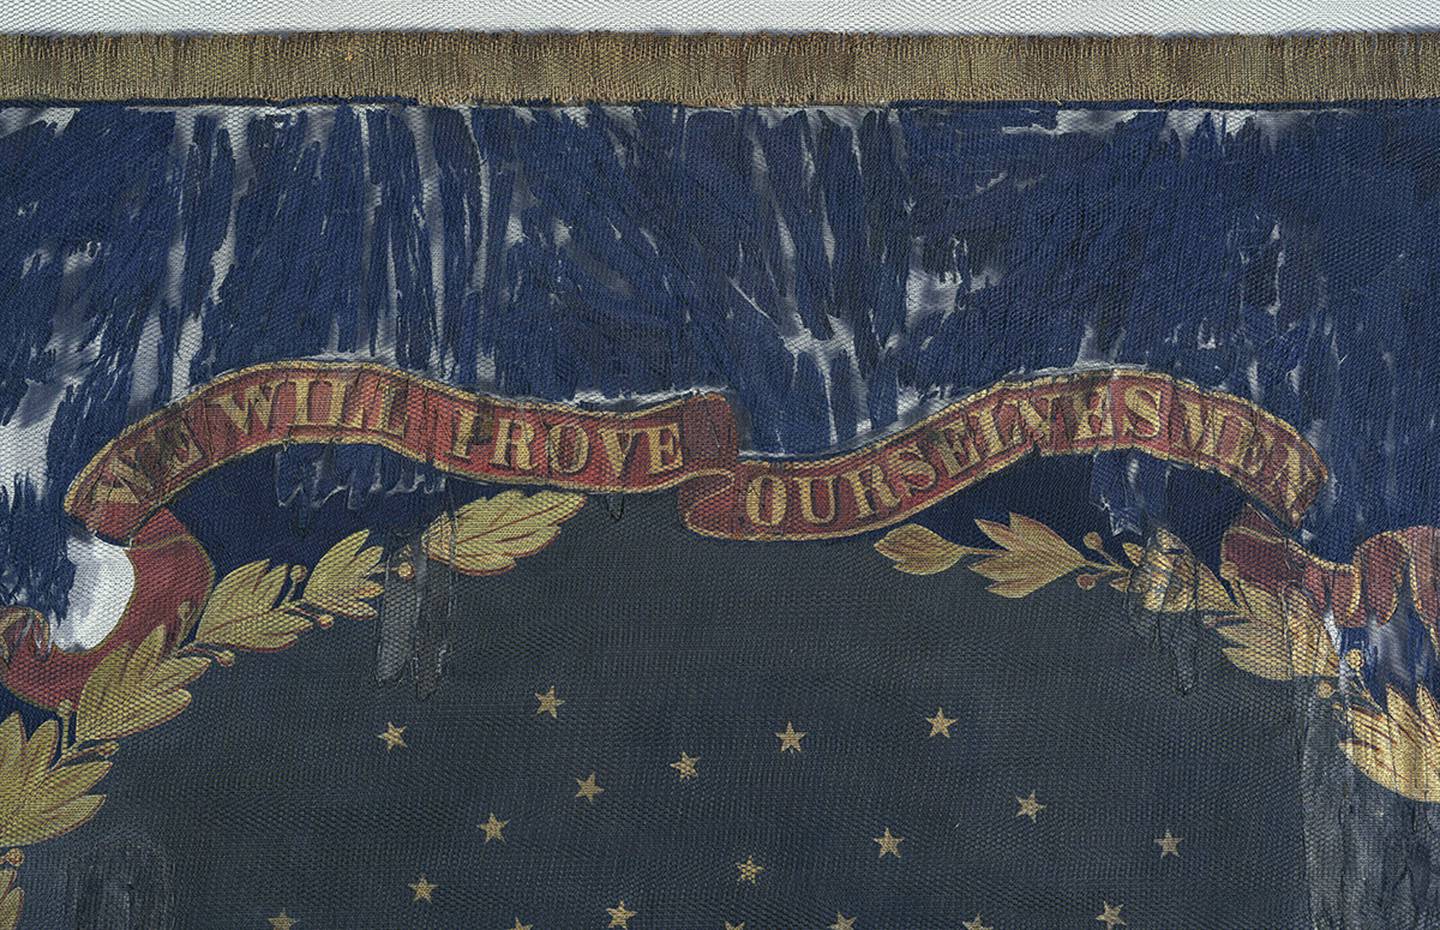 the 127th Regiment United States Colored Troops battle flag